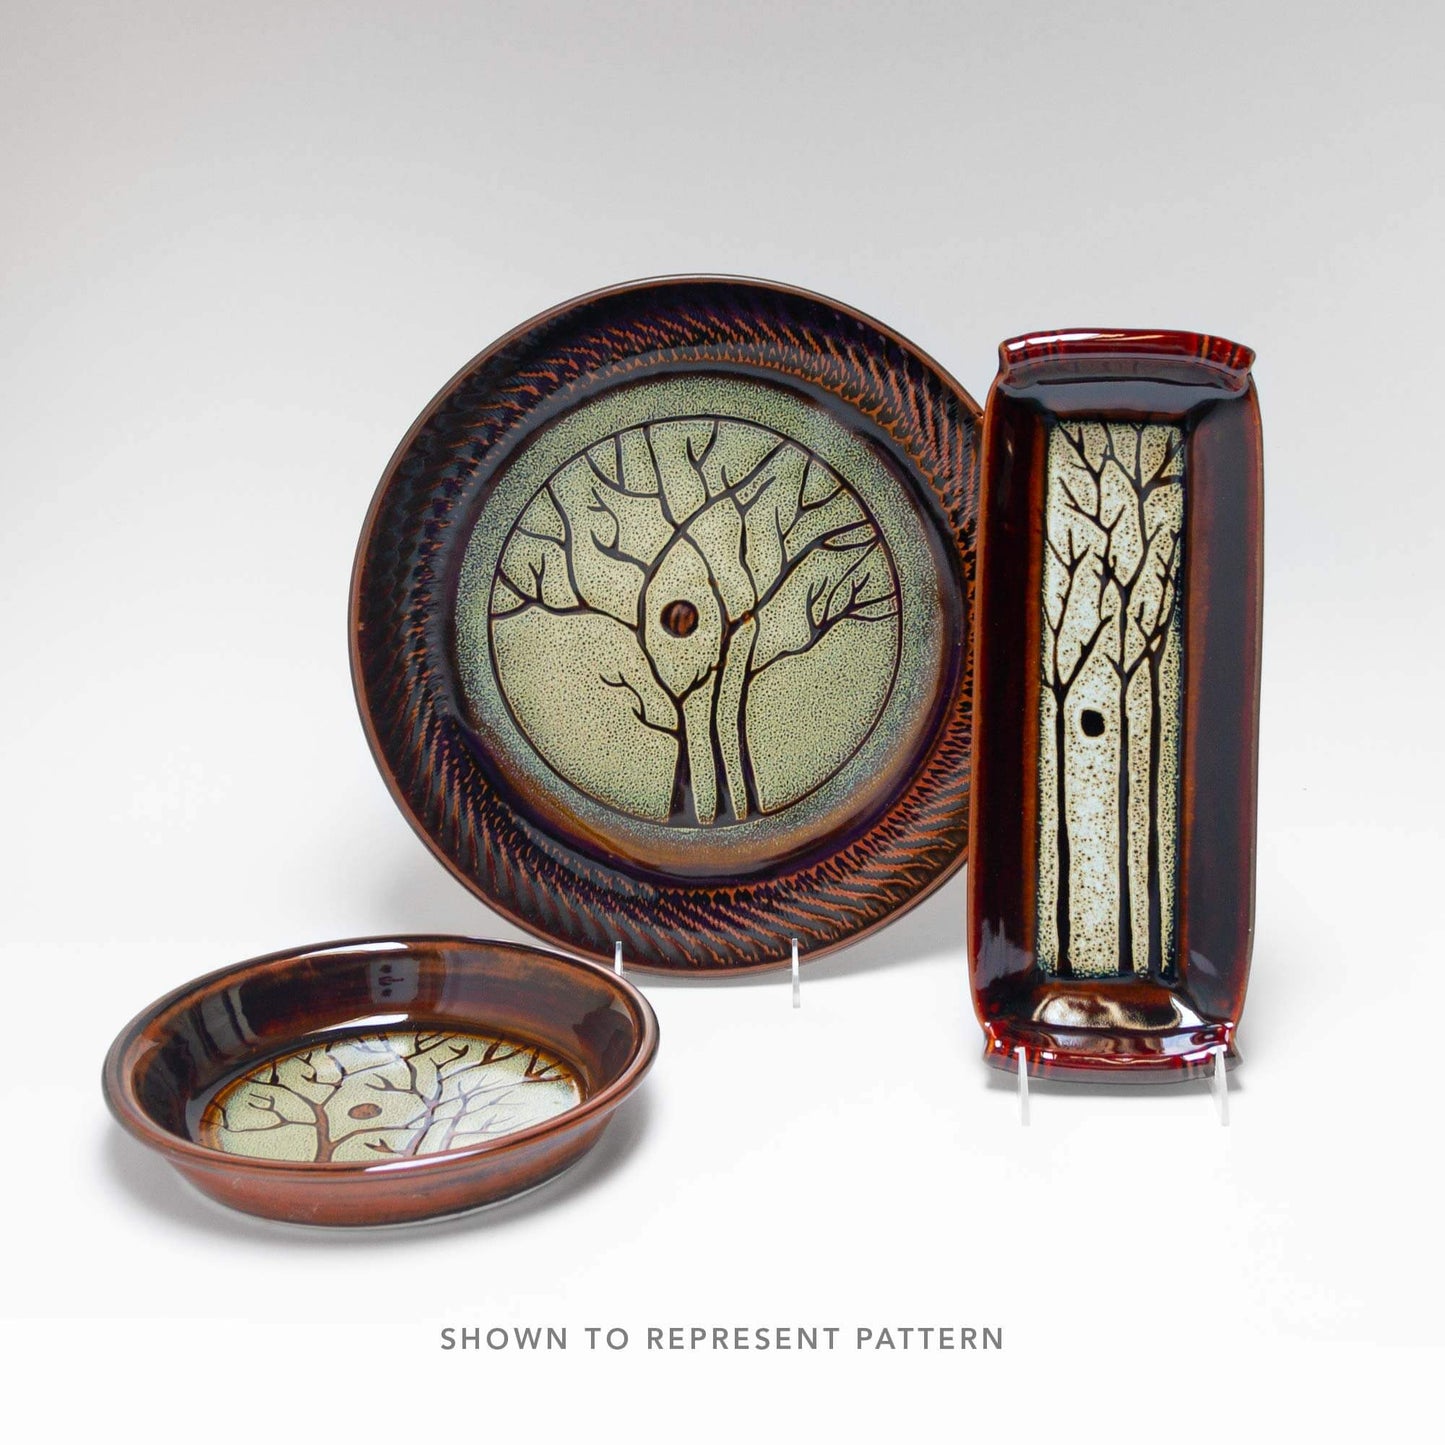 Handmade Pottery Large Clock w/ Stand in Hamada Tree pattern made by Georgetown Pottery in Maine